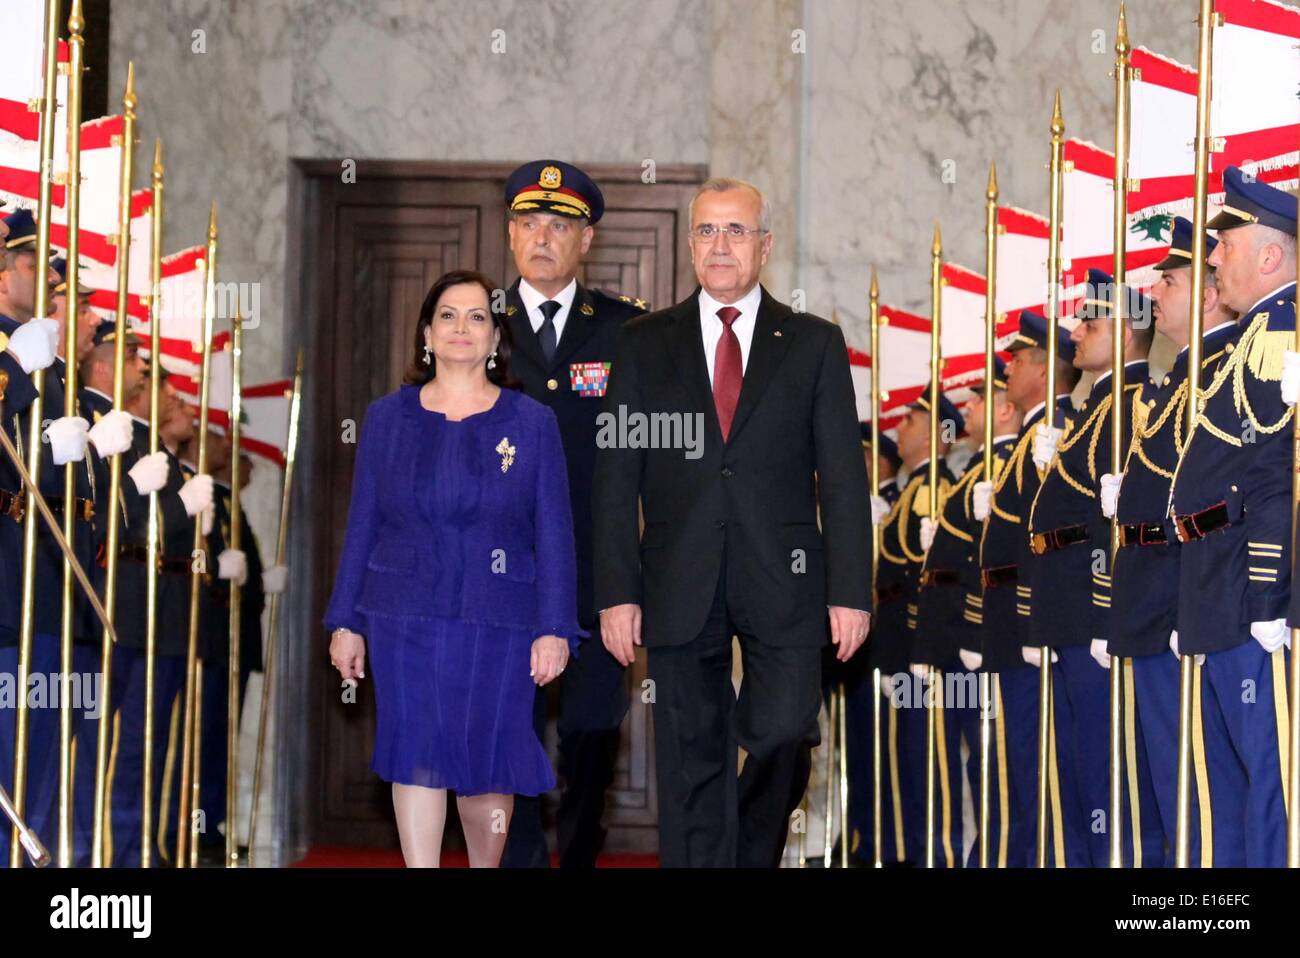 Beirut, Saturday. 24th May, 2014. Lebanese President Michel Suleiman and his wife leave presidential palace in Baabda, Lebanon, on Saturday, May 24, 2014. Outgoing Lebanese President Michel Suleiman stressed Saturday that the 'Baabda Declaration was praised by the international community as it is the only way to dissociate Lebanon from the neighboring conflicts.' © Dalatinohra/Xinhua/Alamy Live News Stock Photo